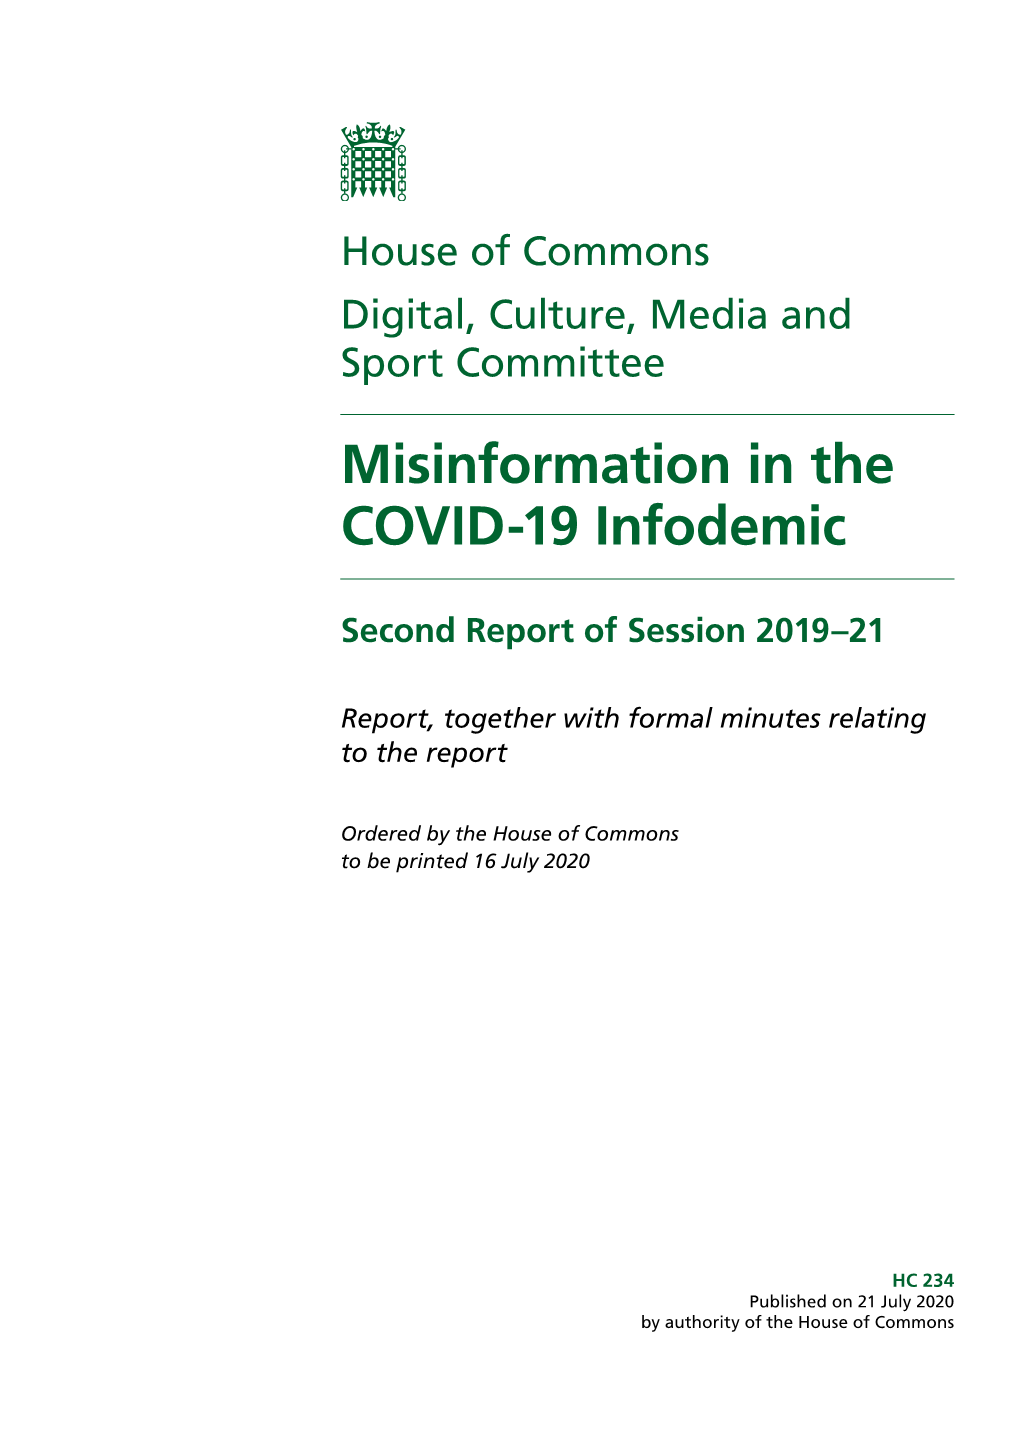 Report: Misinformation in the Covid-19 Infodemic